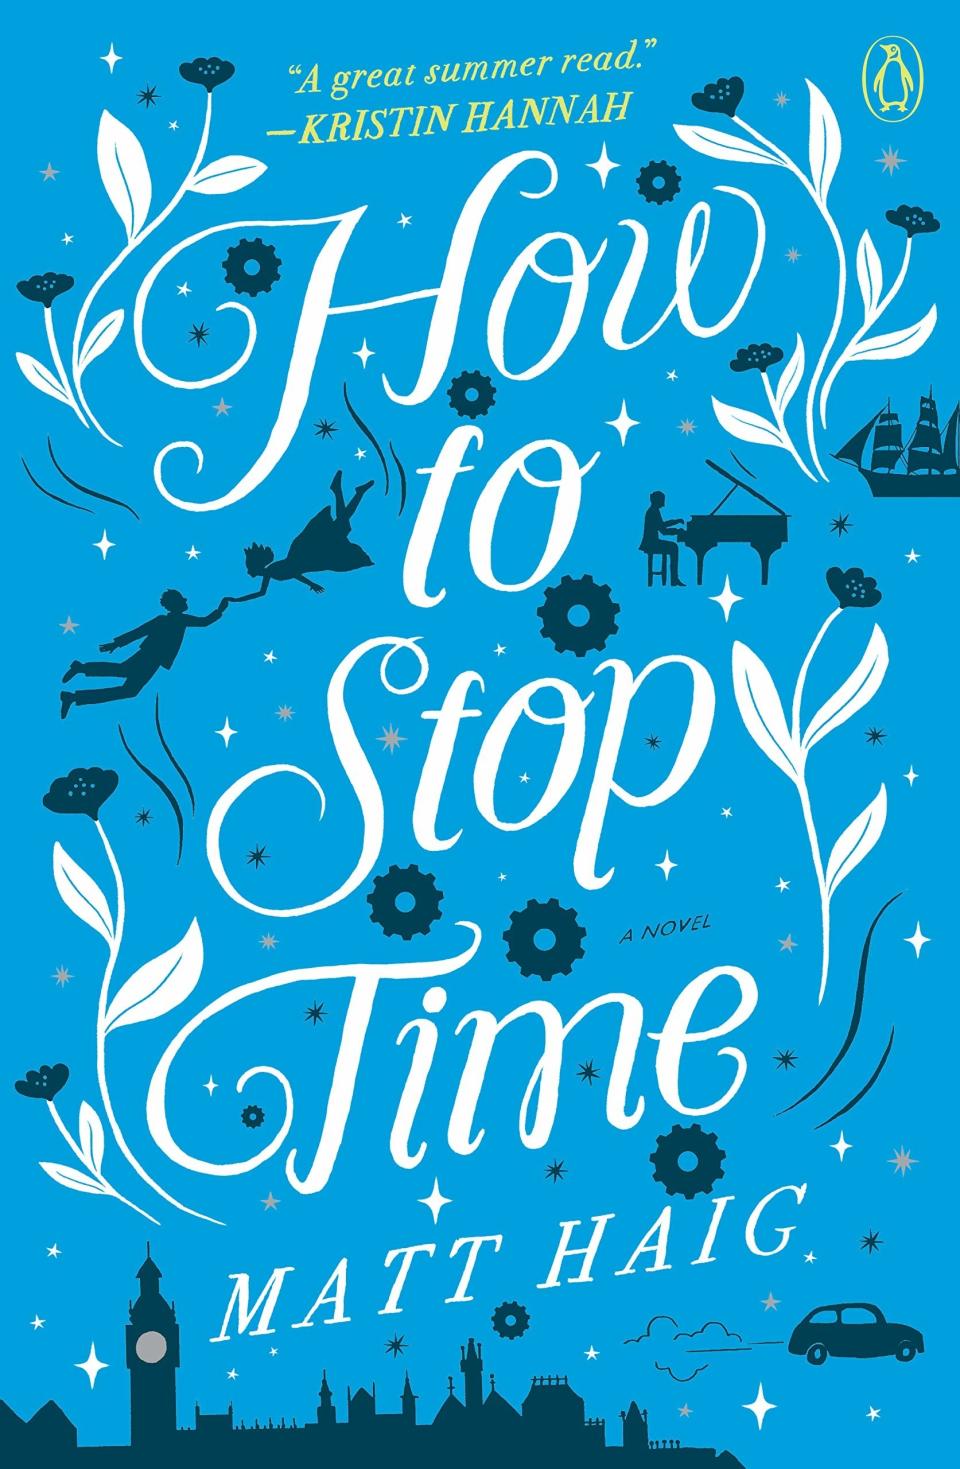 How to Stop Time follows a man who lives for 400 years in the shadows, observing others and watching the clock tick on by. Tom Hazard, the protagonist, has a condition that causes him to age slowly and thus living for centuries looking much younger than he is. Tom Hazard fascinates readers with his views on the concepts of time and human nature and his adventures with historical figures. I read this book in one sitting and am still bewildered and dazzled. Escape your current reality and experience history beginning in the 16th century alongside Tom Hazard.